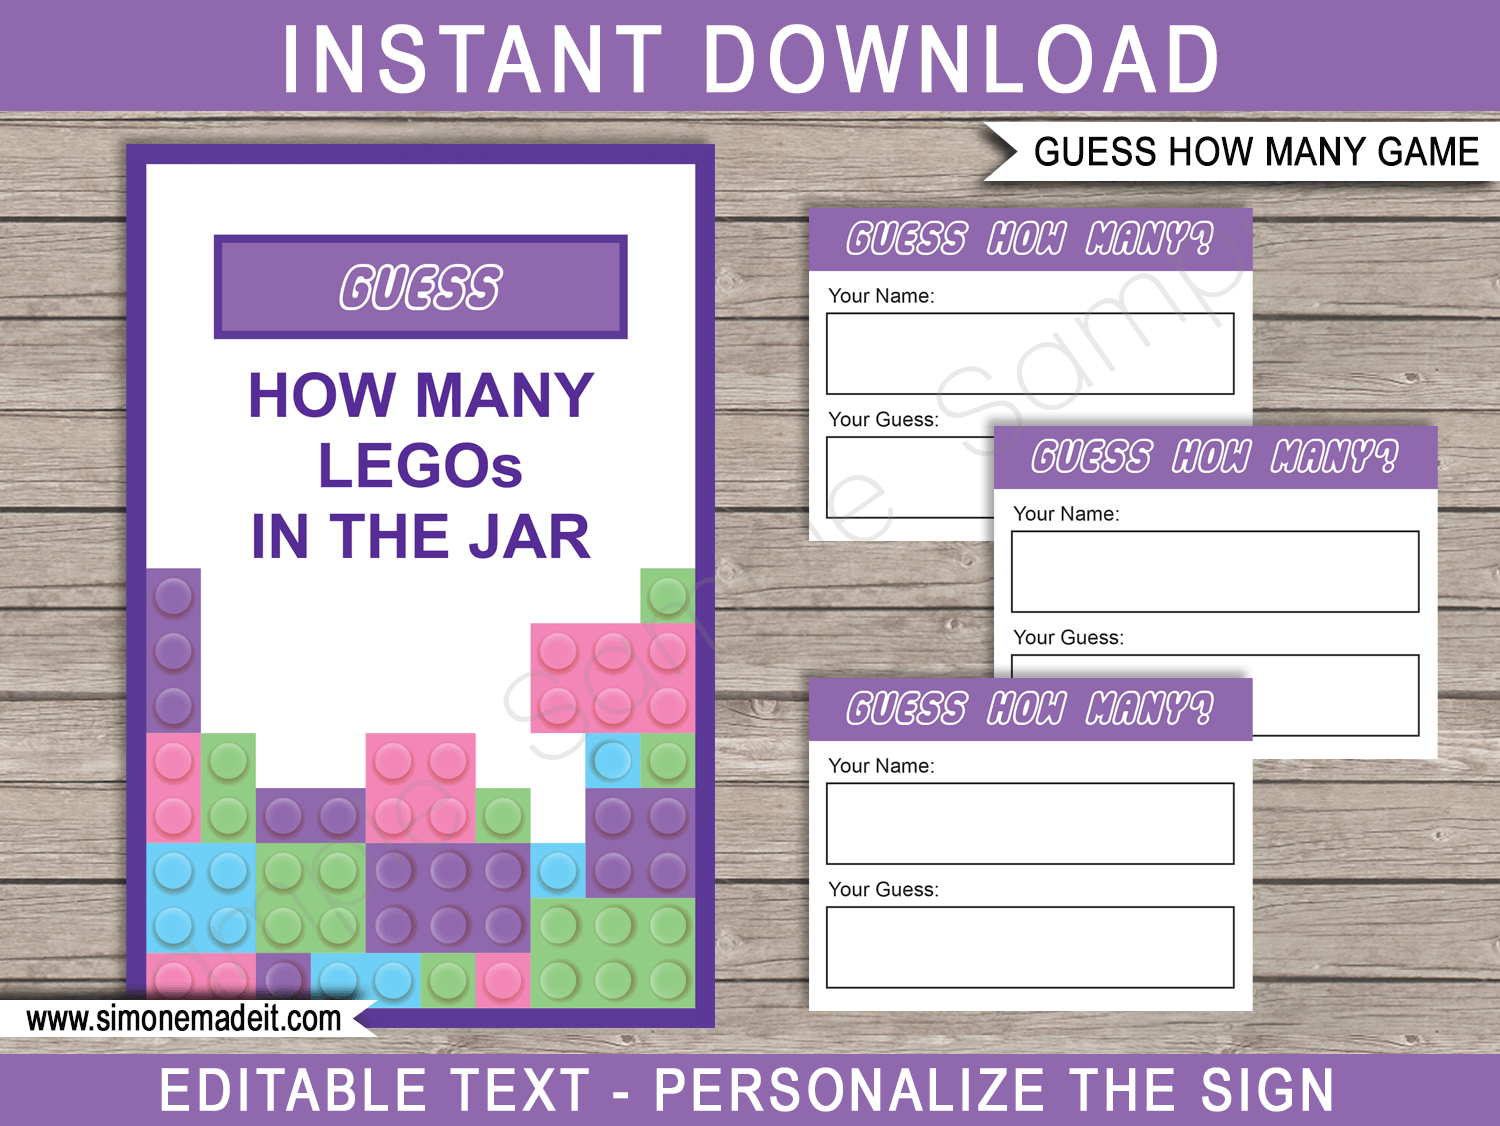 Printable Lego Friends Guess How Many Party Game Template | Birthday Party Games | DIY Editable Text |  $3.00 INSTANT DOWNLOAD via simonemadeit.com